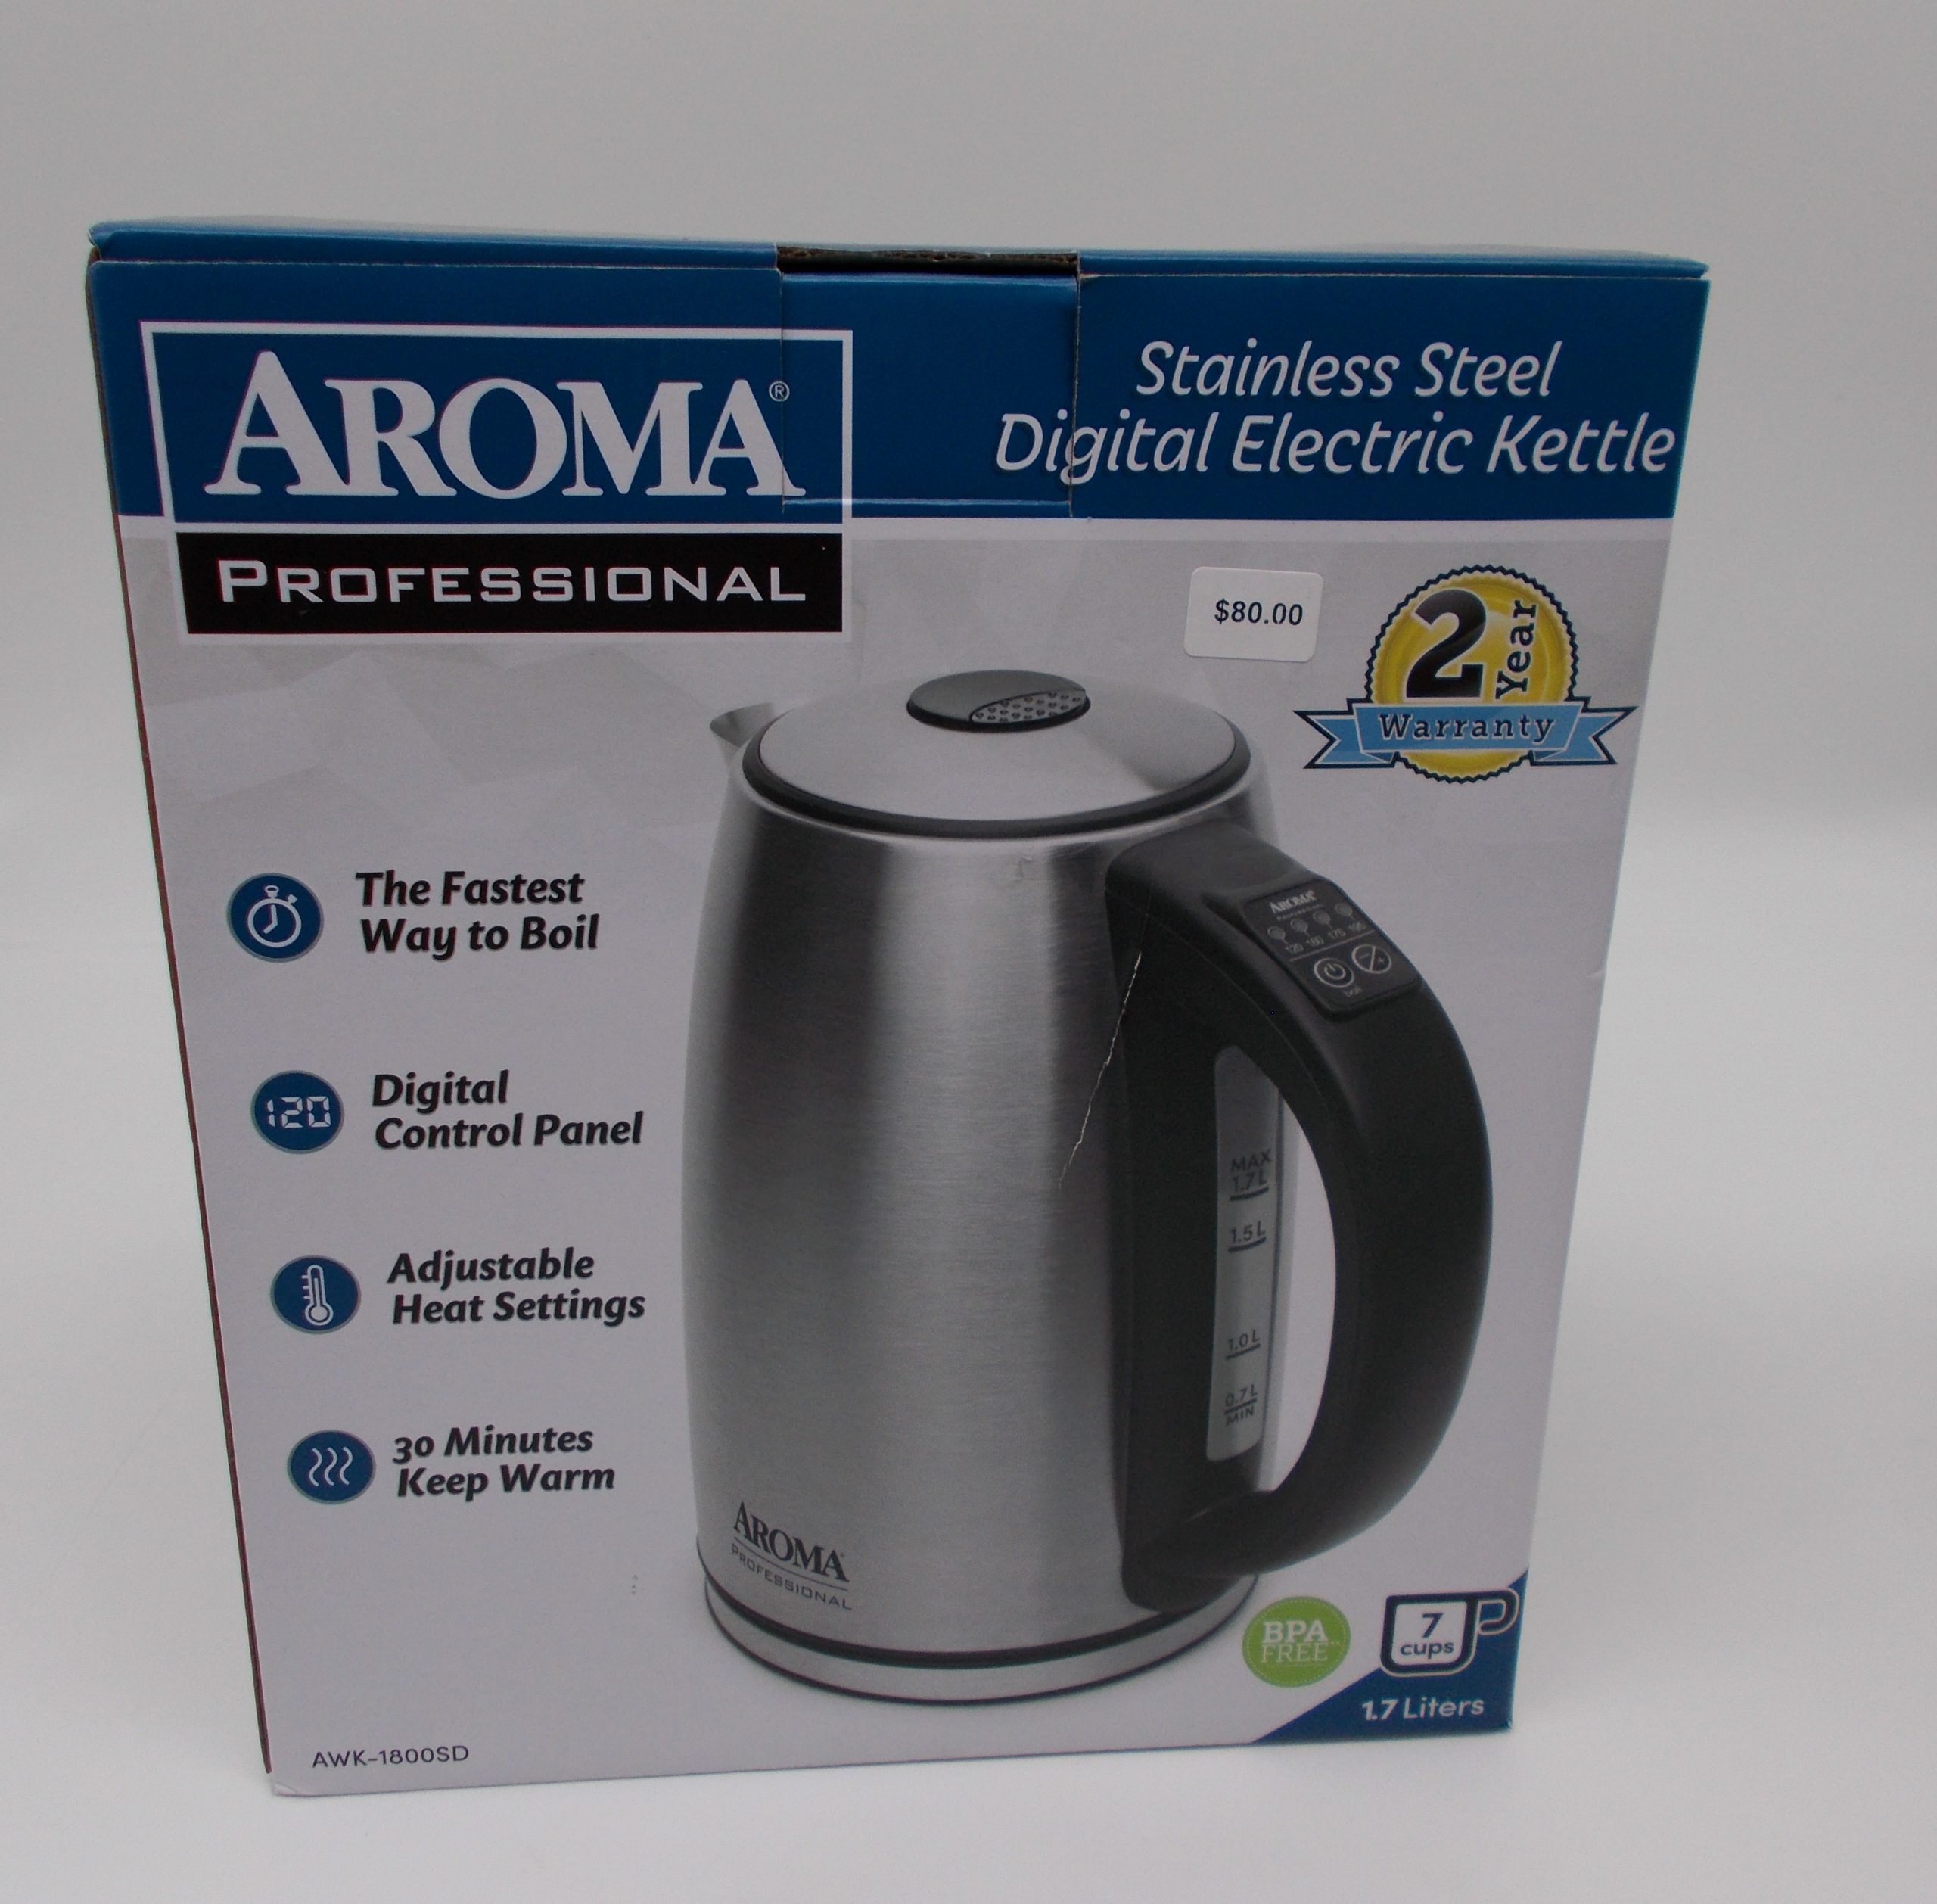 https://mapersons.com/wp-content/uploads/2021/01/Aroma-Kettle-4-scaled.jpg